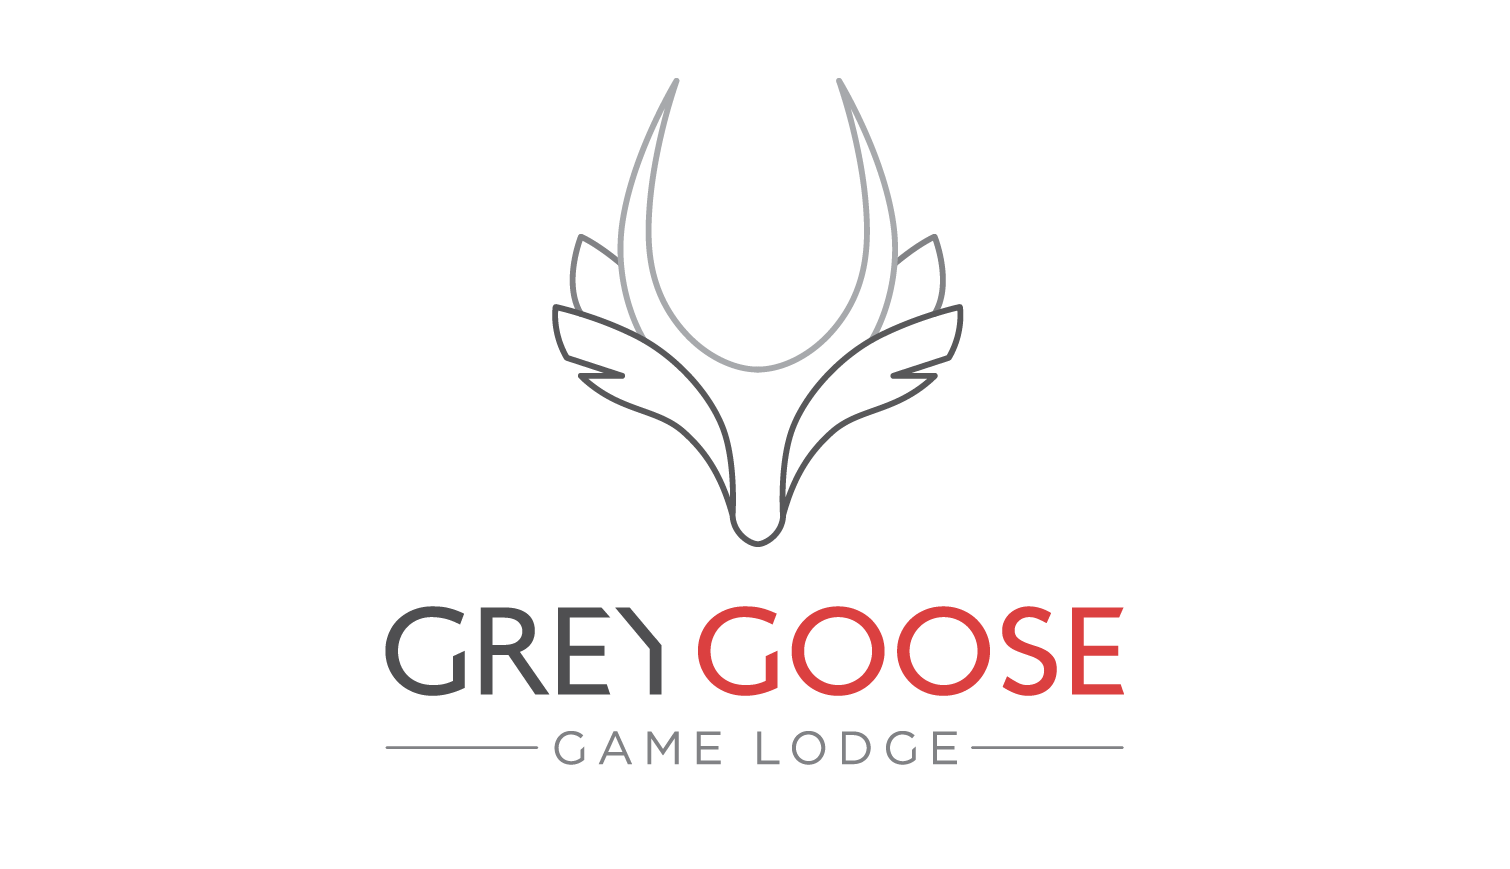 Grey Goose Logo - We will make your stay remarkable | Grey Goose Game Lodge